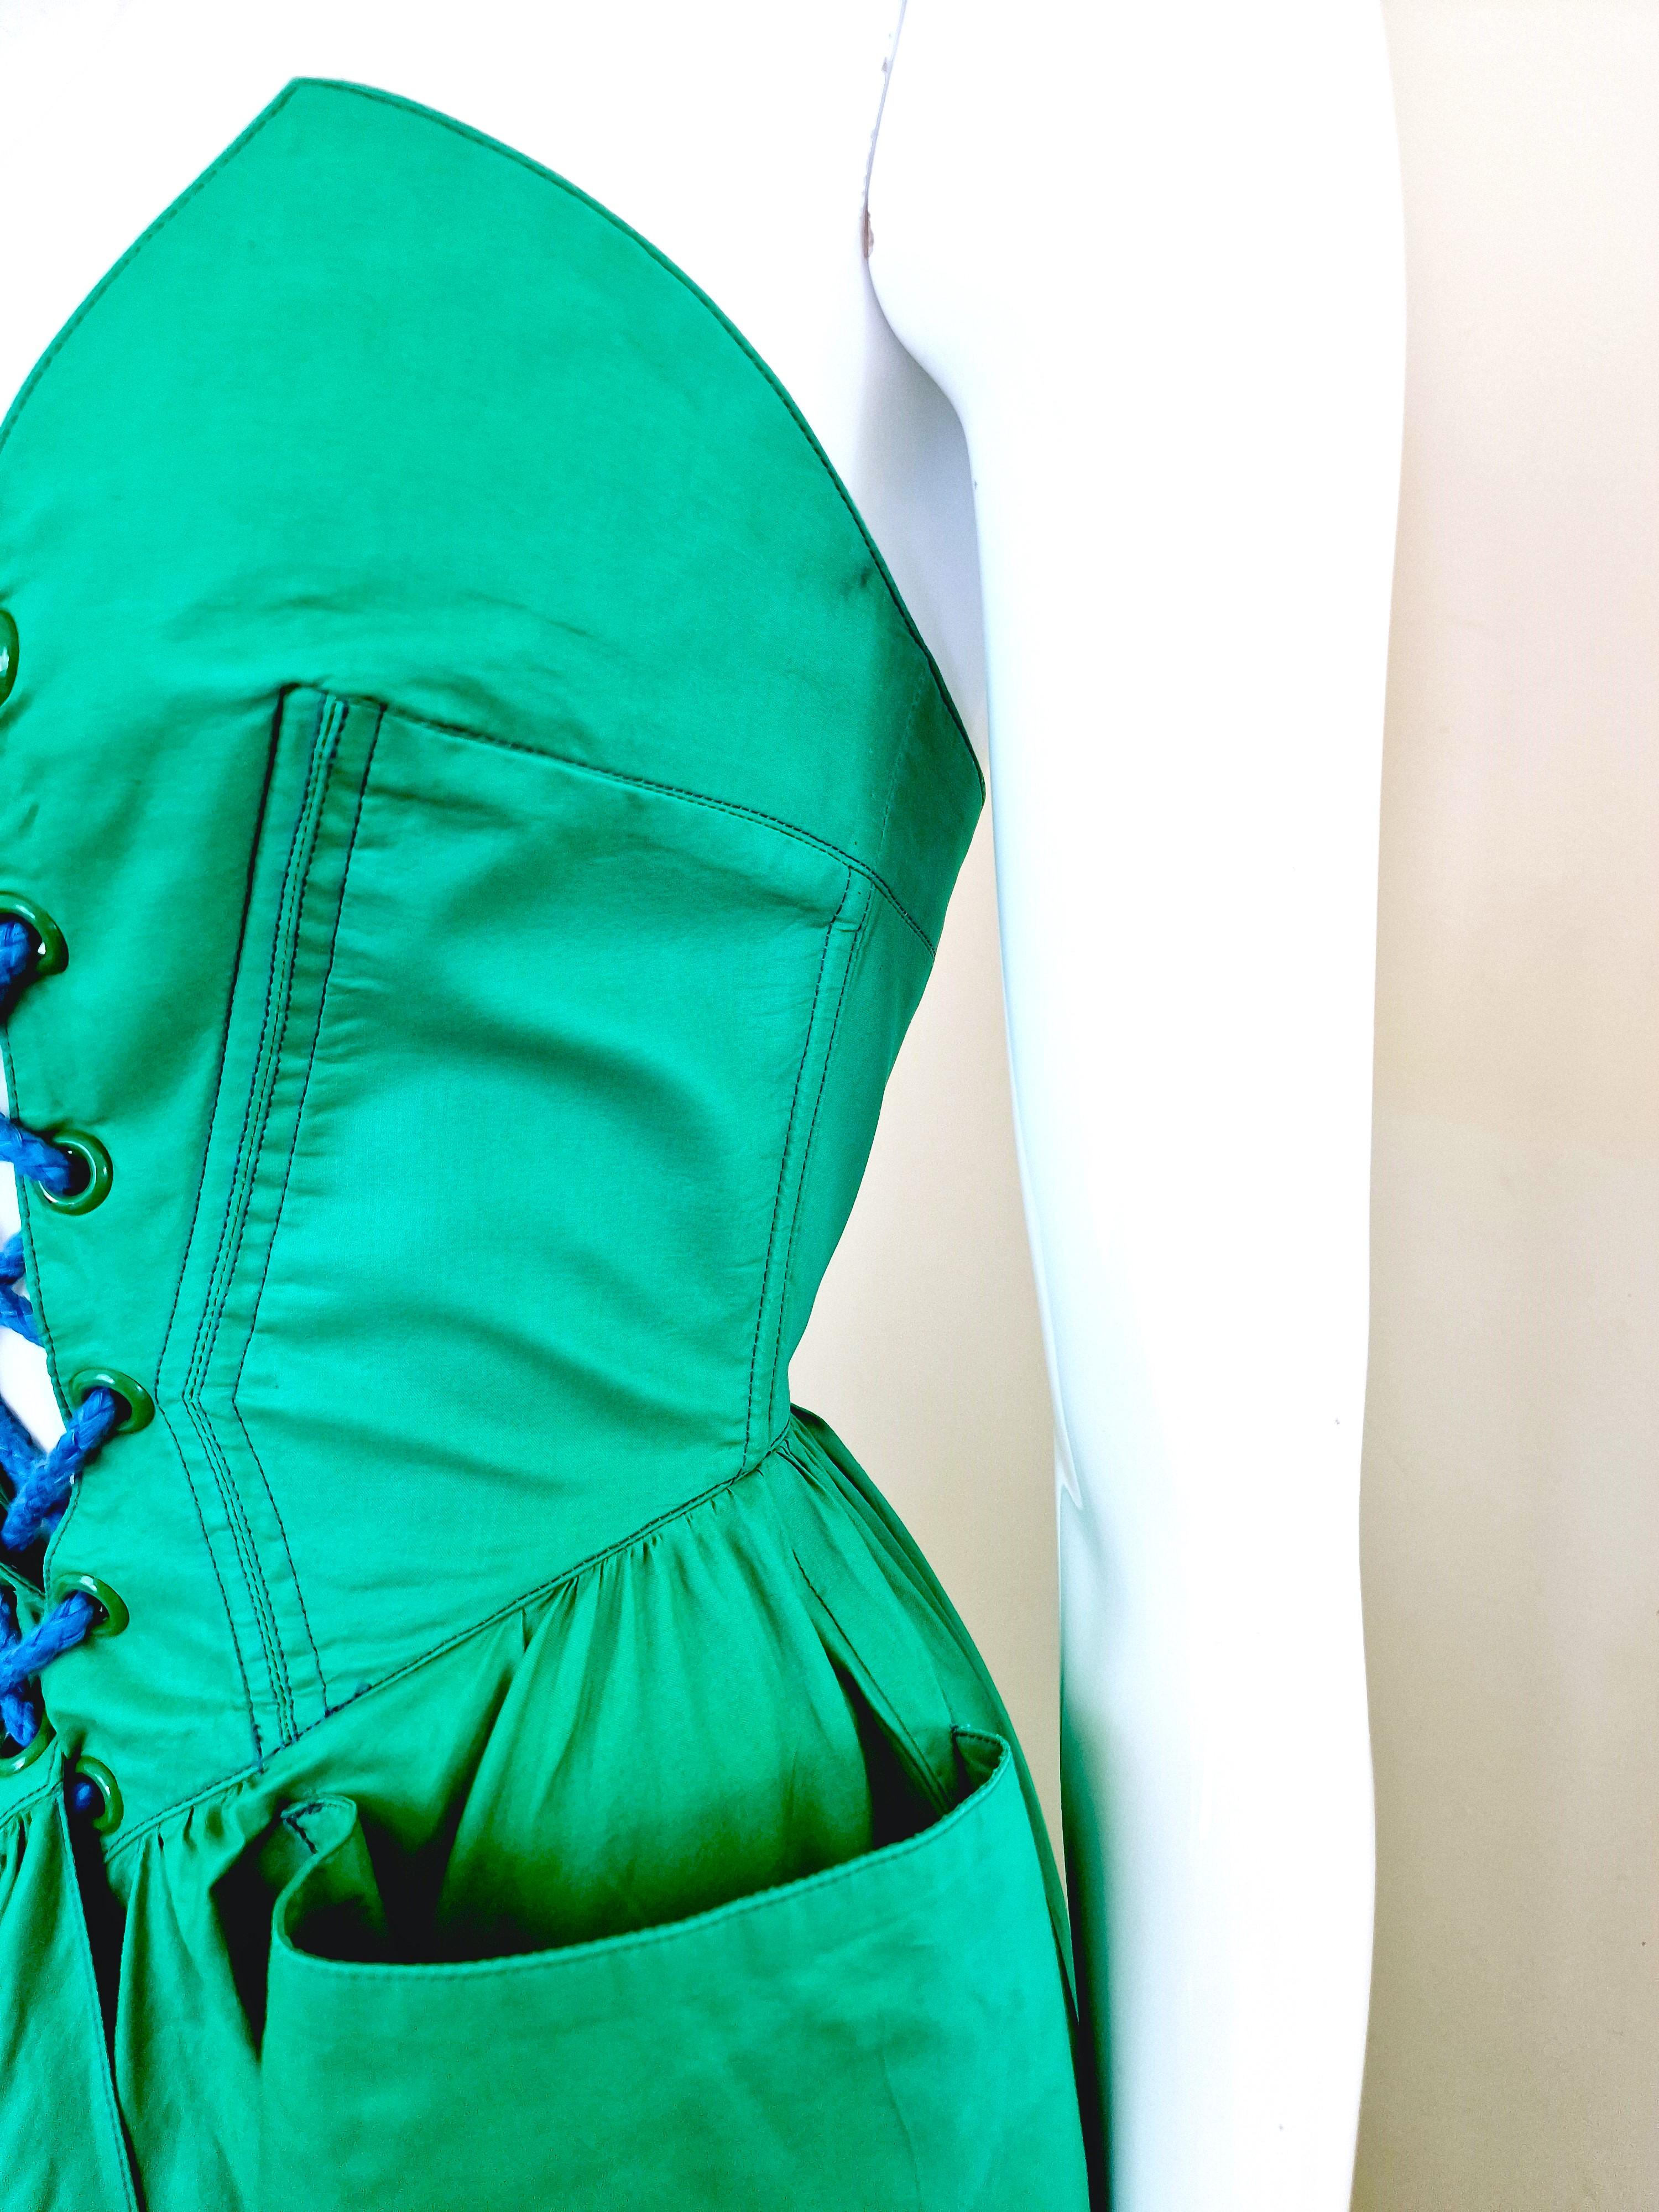 Thierry Mugler Corset Lace Up Green Vintage Couture Gown Prom Bustier Dress en vente 12